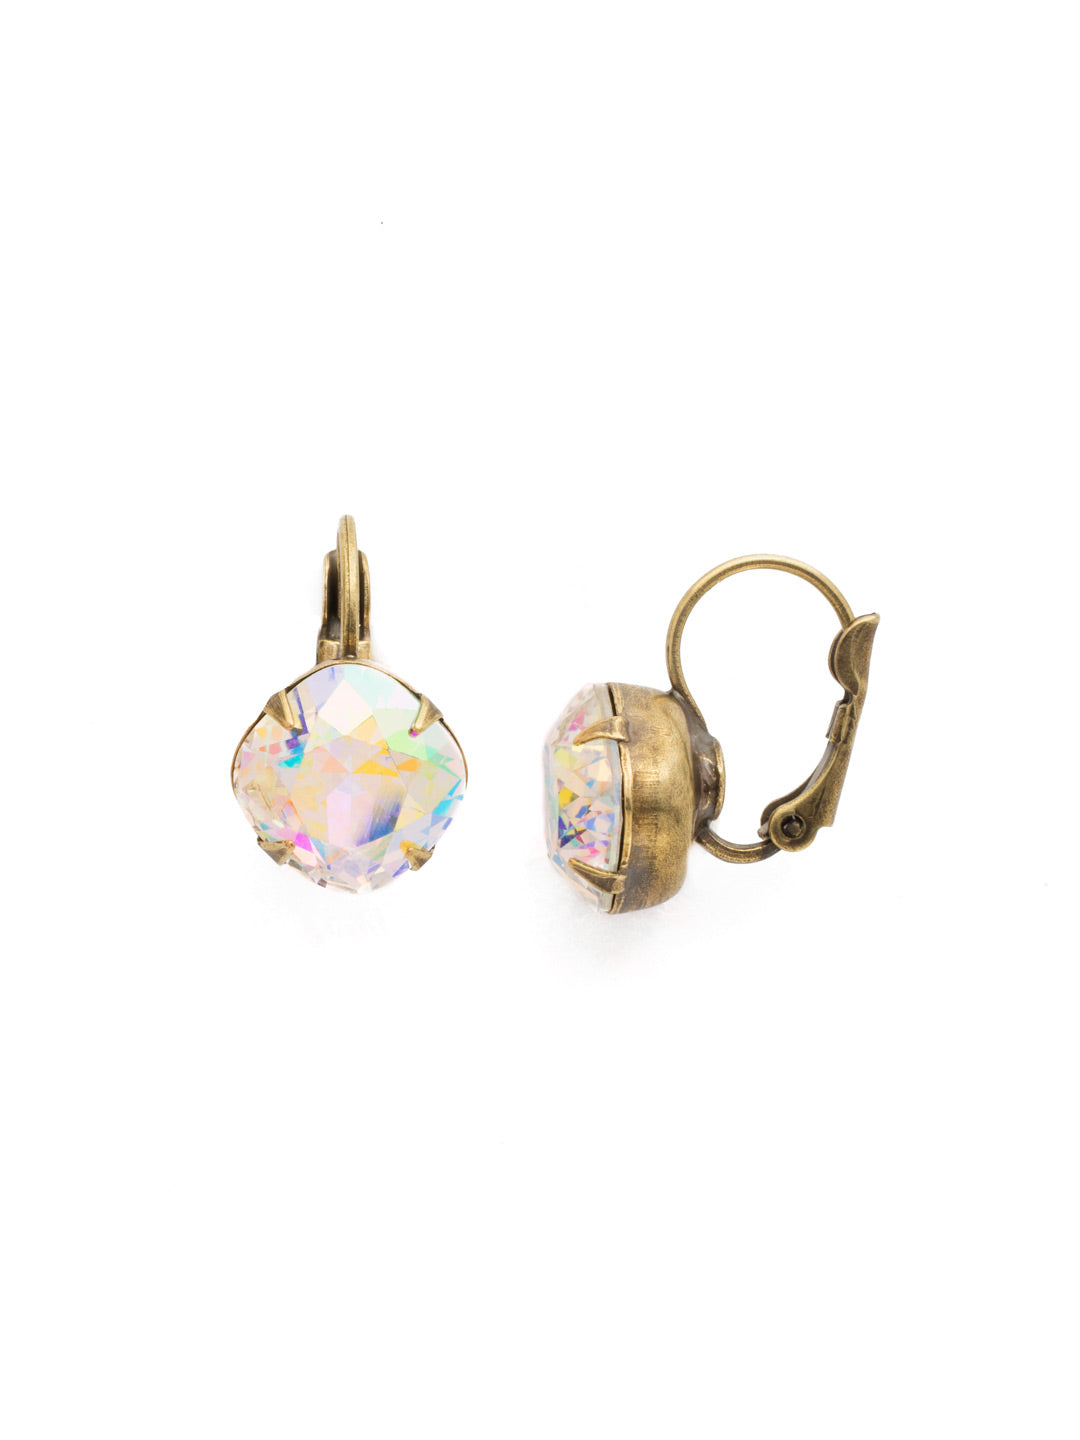 Cushion-Cut Dangle Earrings - EDL12AGCAB - A simple, yet stunning earring featuring a cushion cut crystal that will never go out of style. From Sorrelli's Crystal Aurora Borealis collection in our Antique Gold-tone finish.